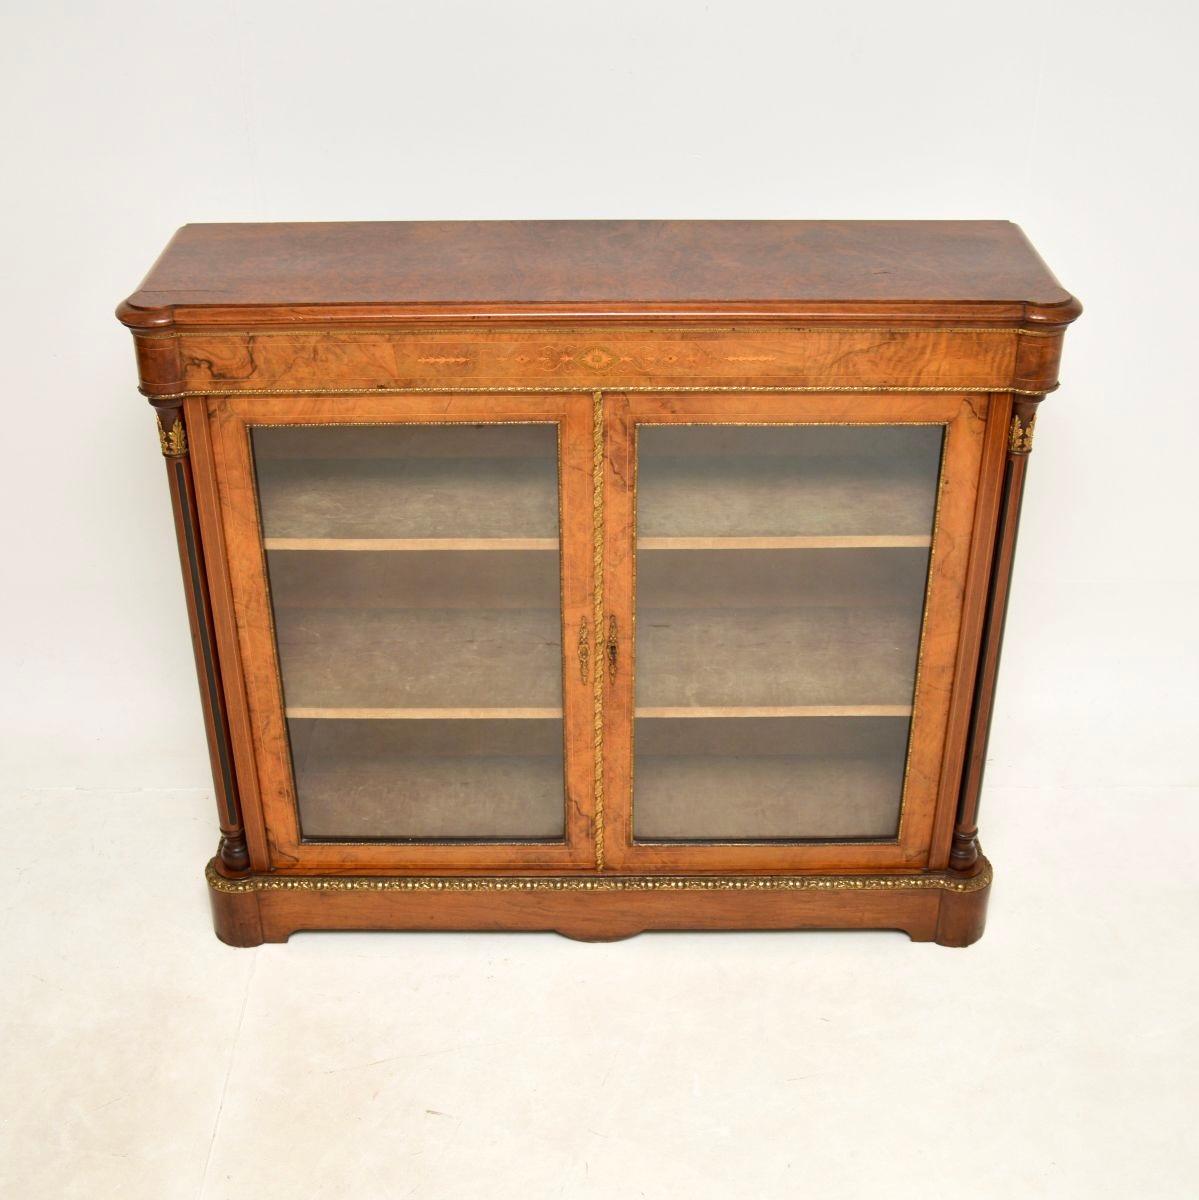 An absolutely stunning antique Victorian burr walnut twin pier cabinet / bookcase. This was made in England, it dates from around the 1860-1880 period.

It is of extremely fine quality and is a very useful size, with plenty of storage space. The